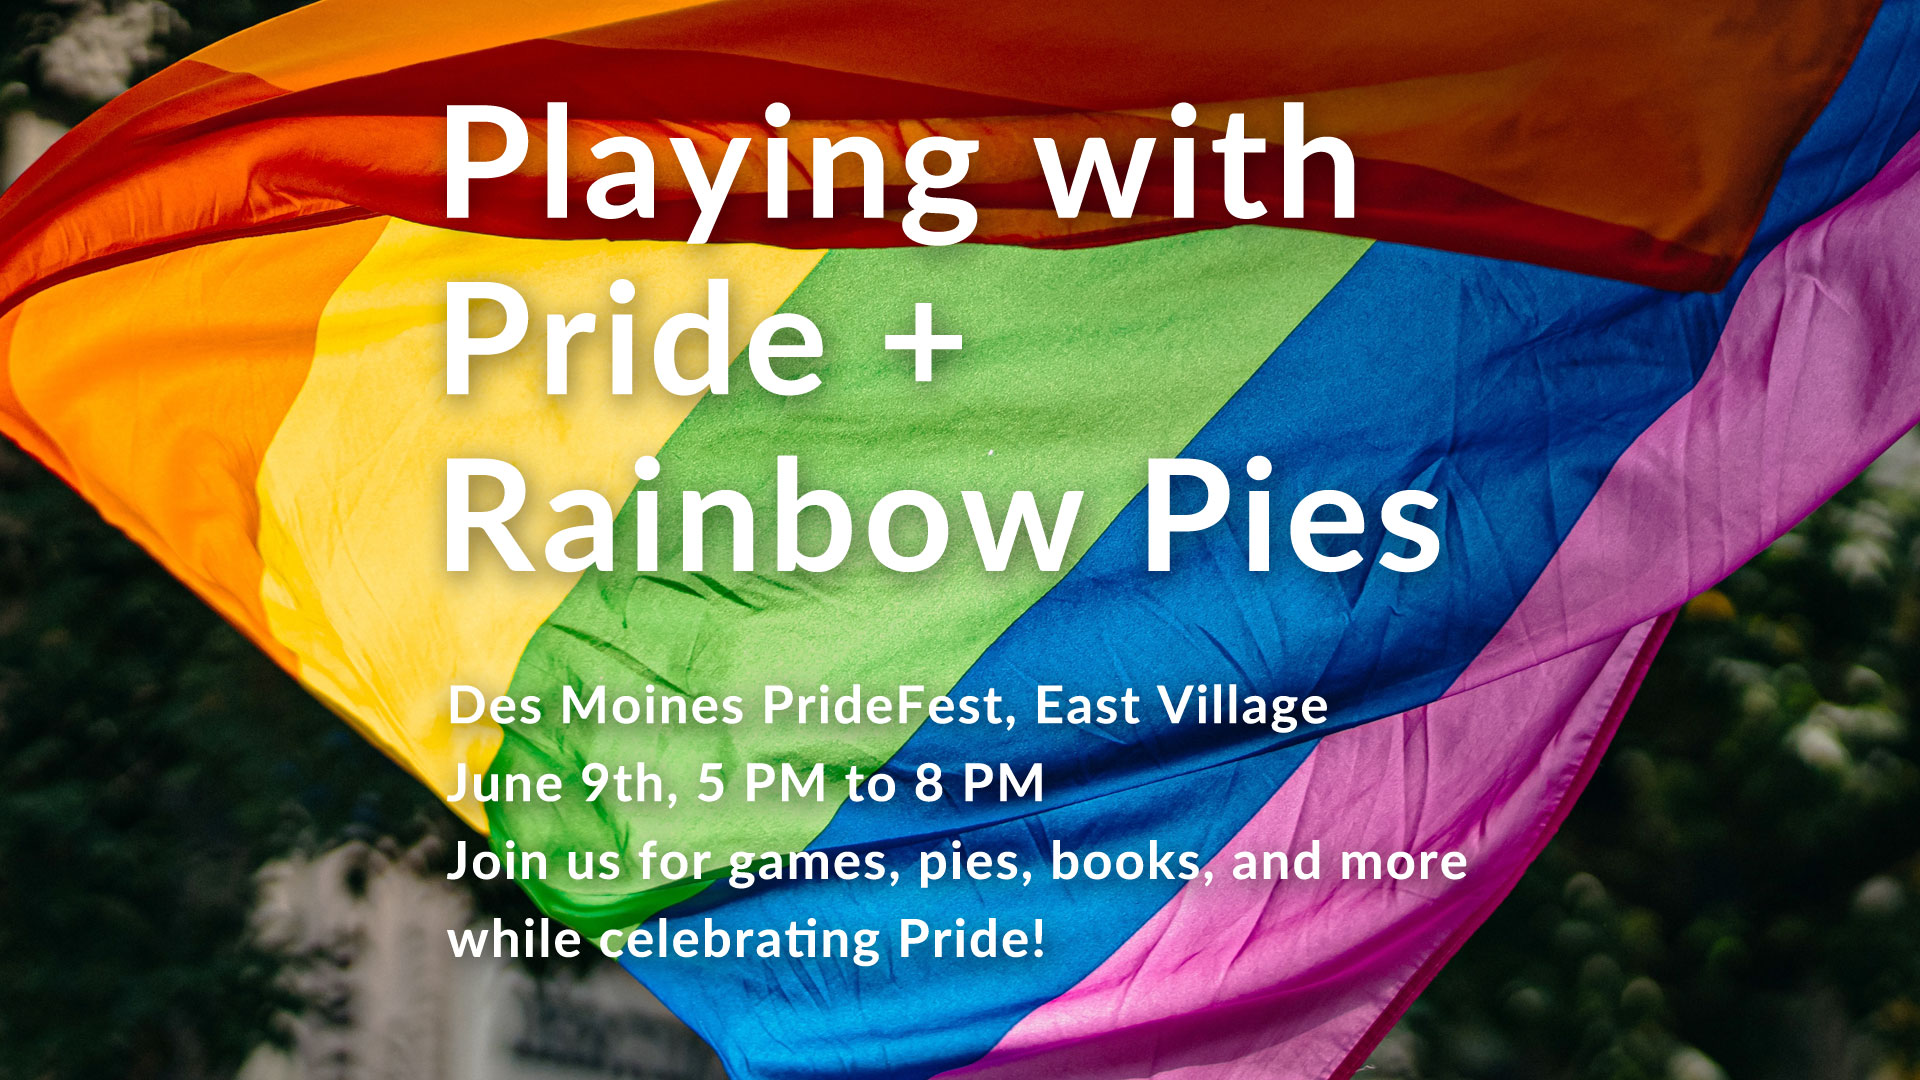 PopUp Playing with Pride + Rainbow Pies at Des Moines PrideFest The